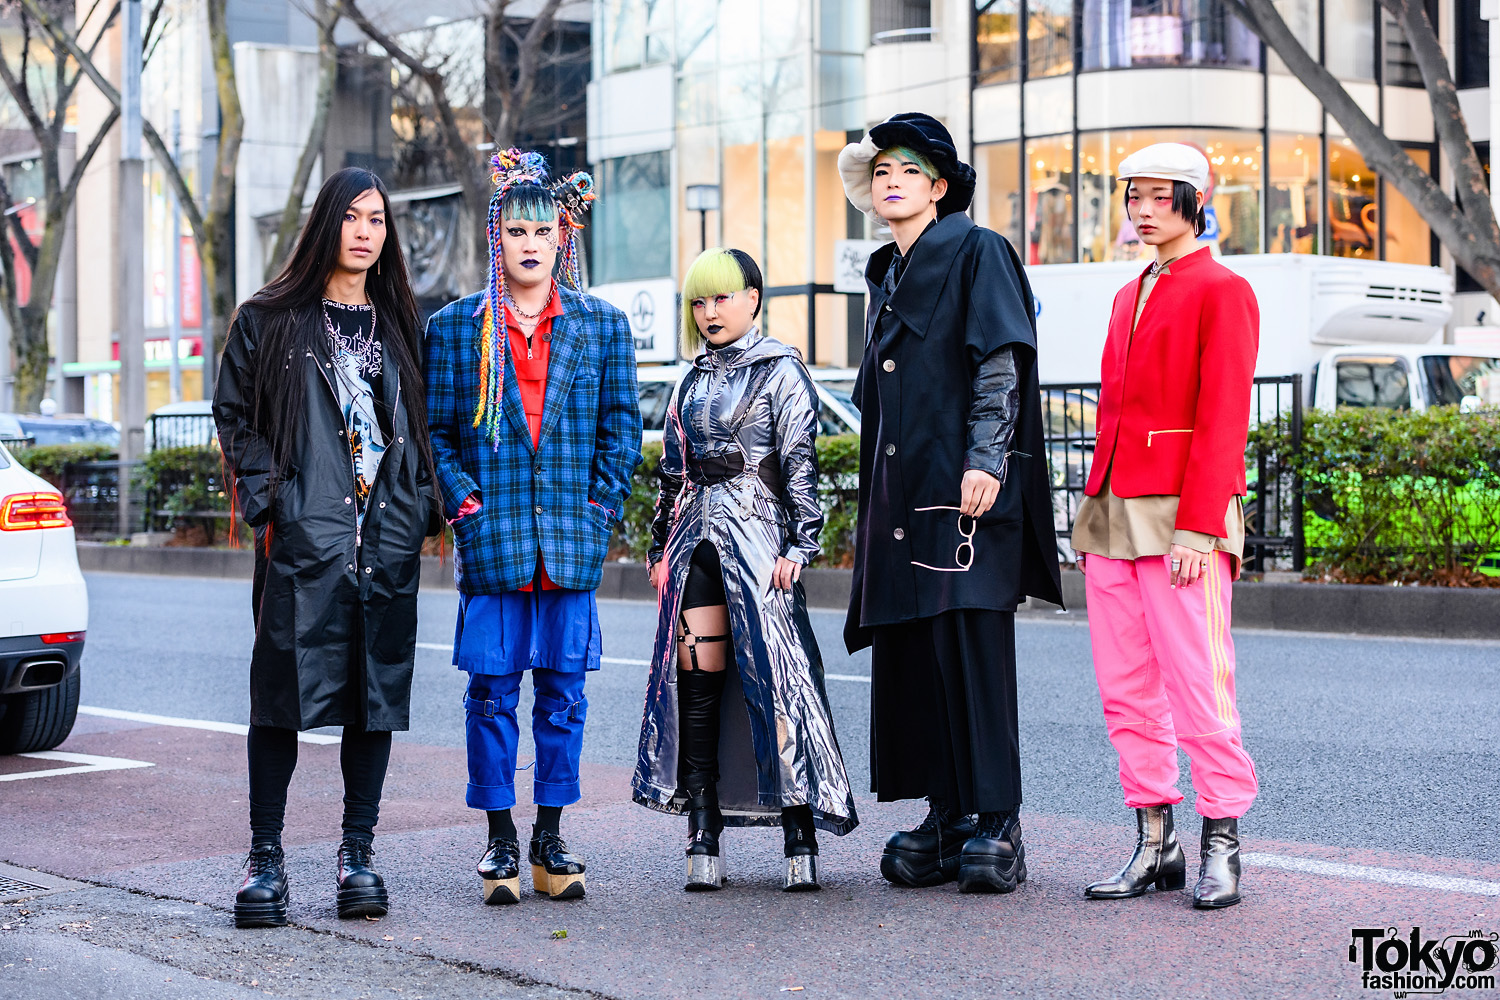 Harajuku Squad Styles w/ Cradle of Filth Tee, Multicolored Braided Buns ...